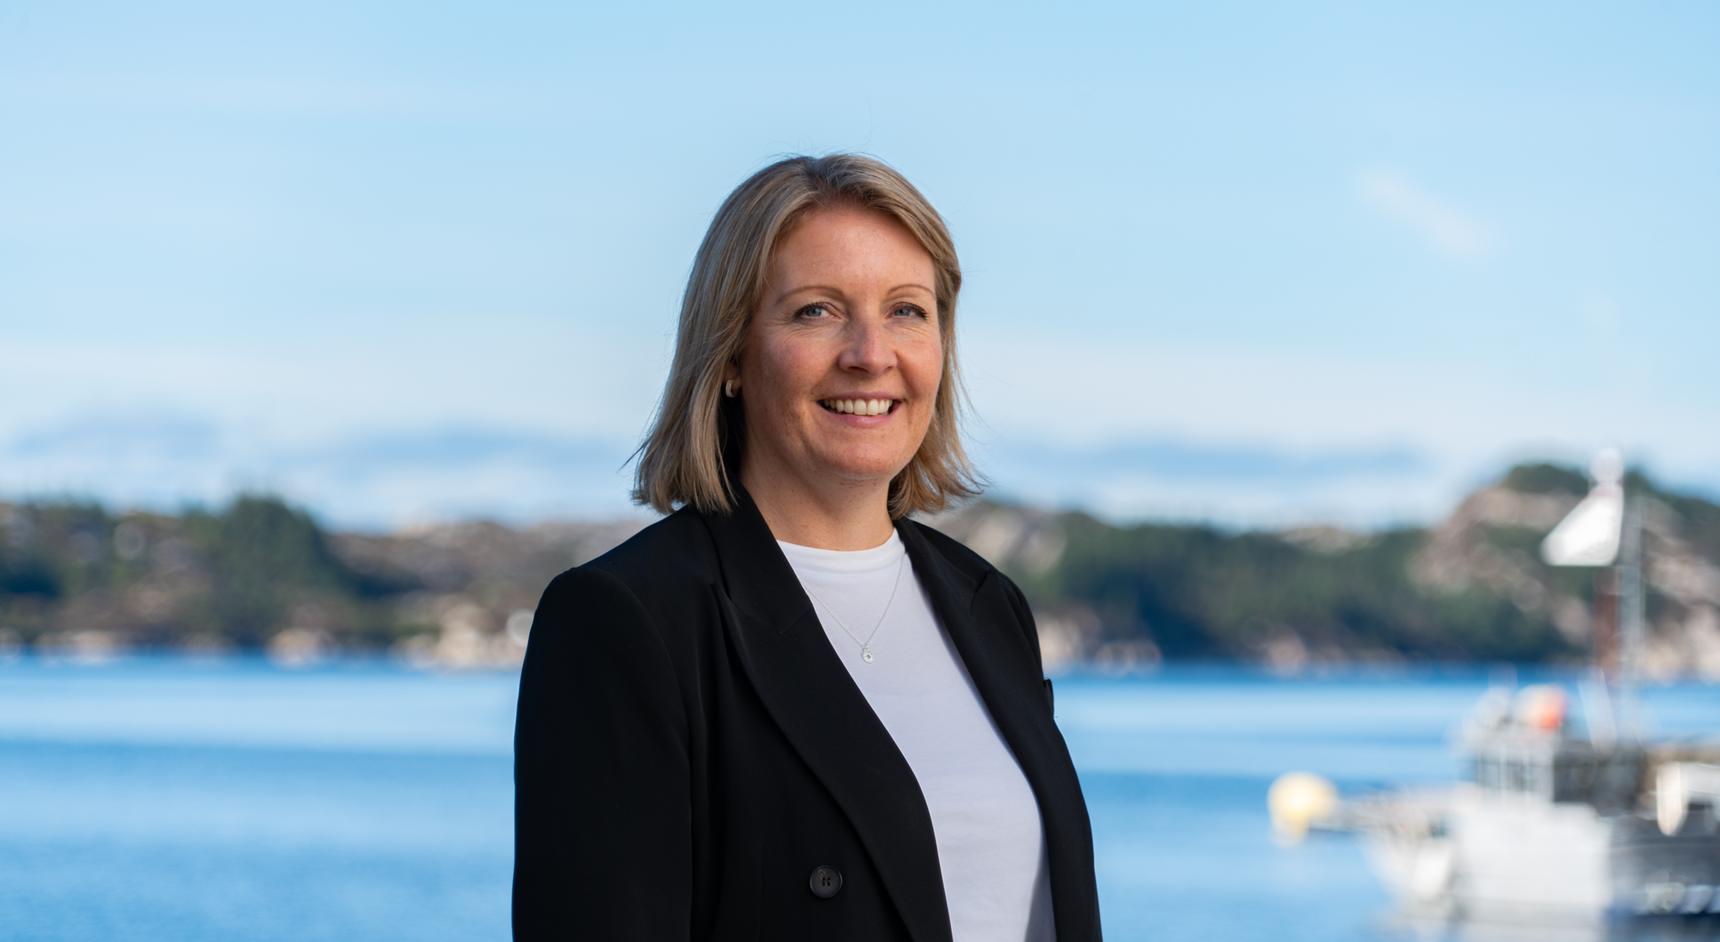 Laila Knarvik, Group Technology & Sustainability Manager in the Bremnes Seashore Group